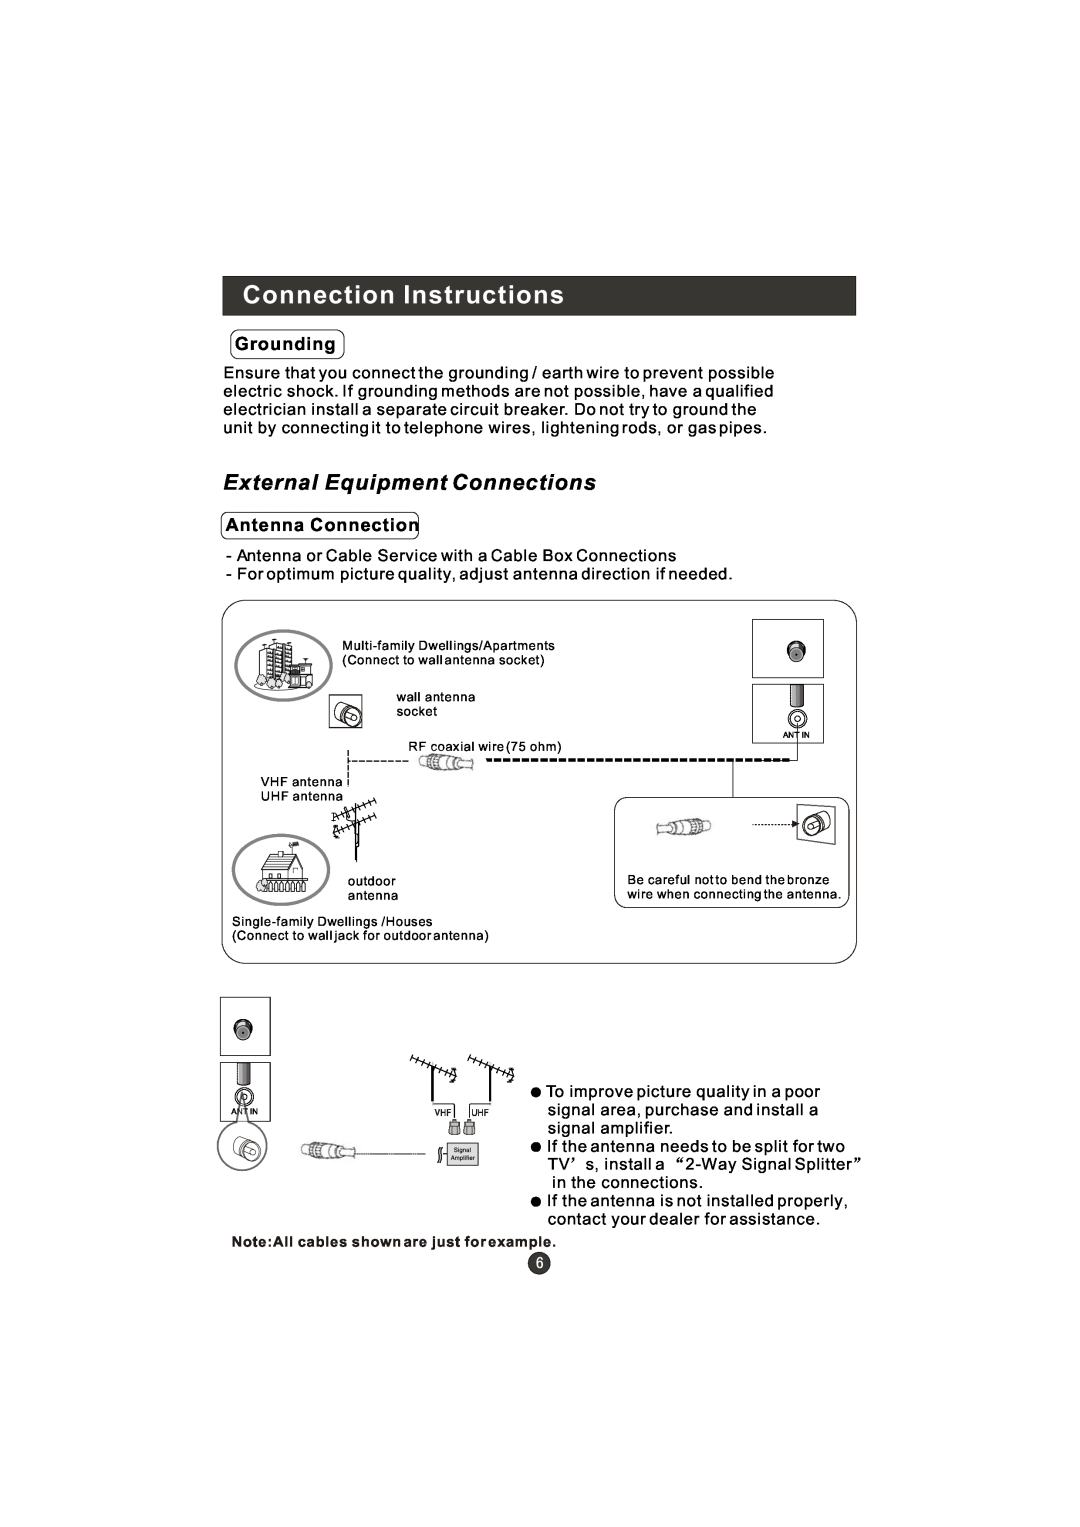 Haier WL22T1, WL19T1 user manual Connection Instructions, Grounding, Antenna Connection, External Equipment Connections 